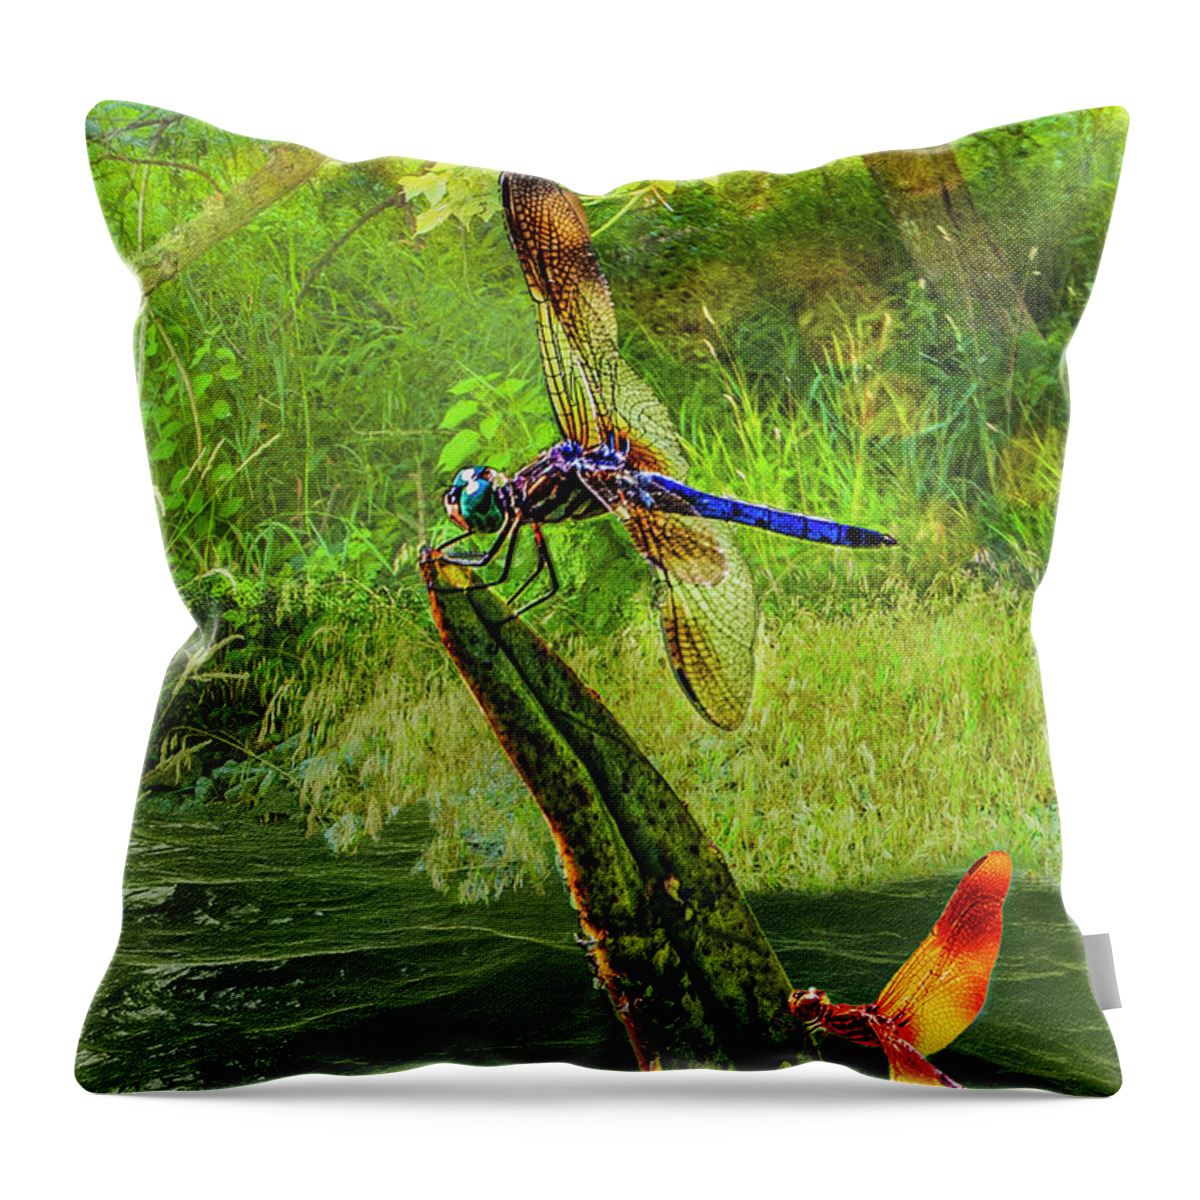 Digital Throw Pillow featuring the digital art Pond Dragon Fly by Anthony Ellis